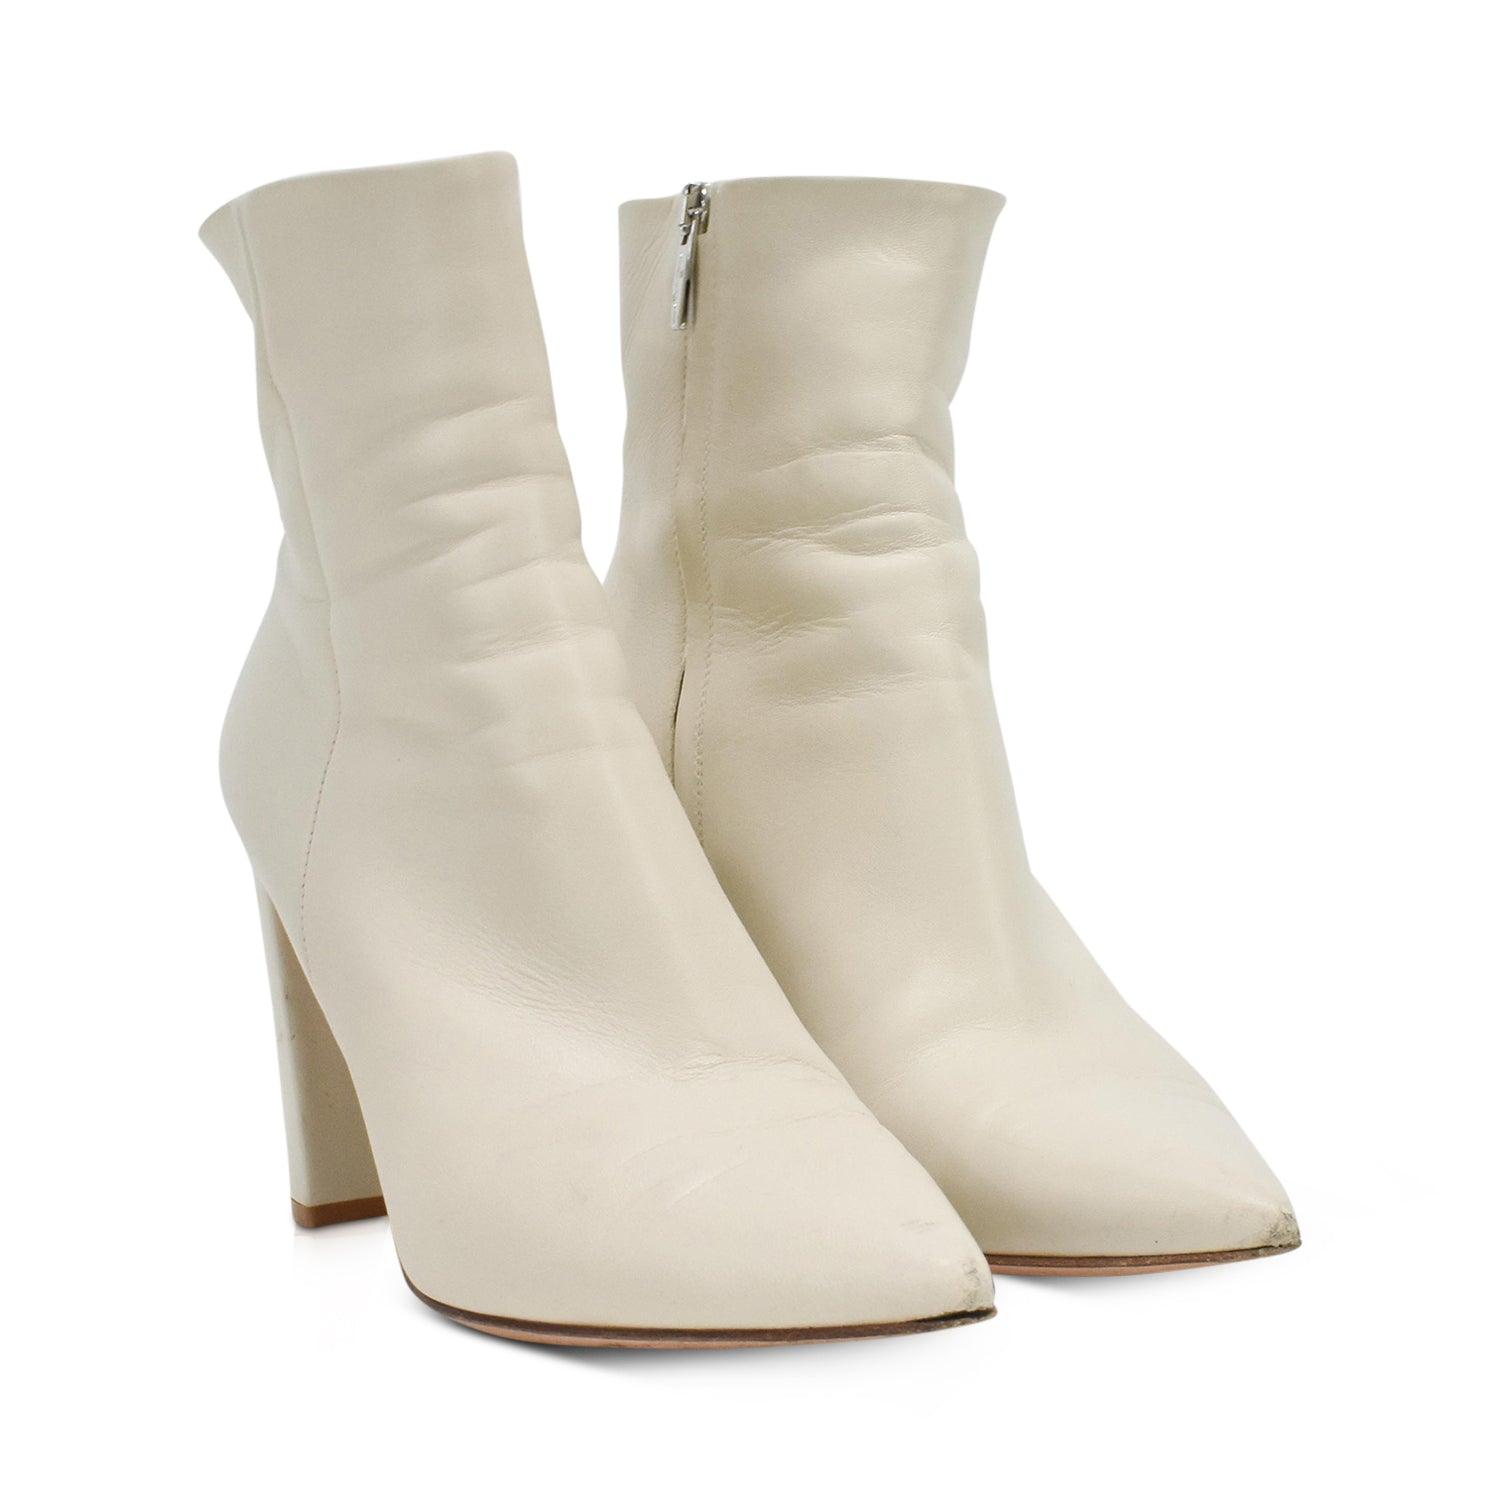 Gianvito Rossi Boots - Women's 40 - Fashionably Yours